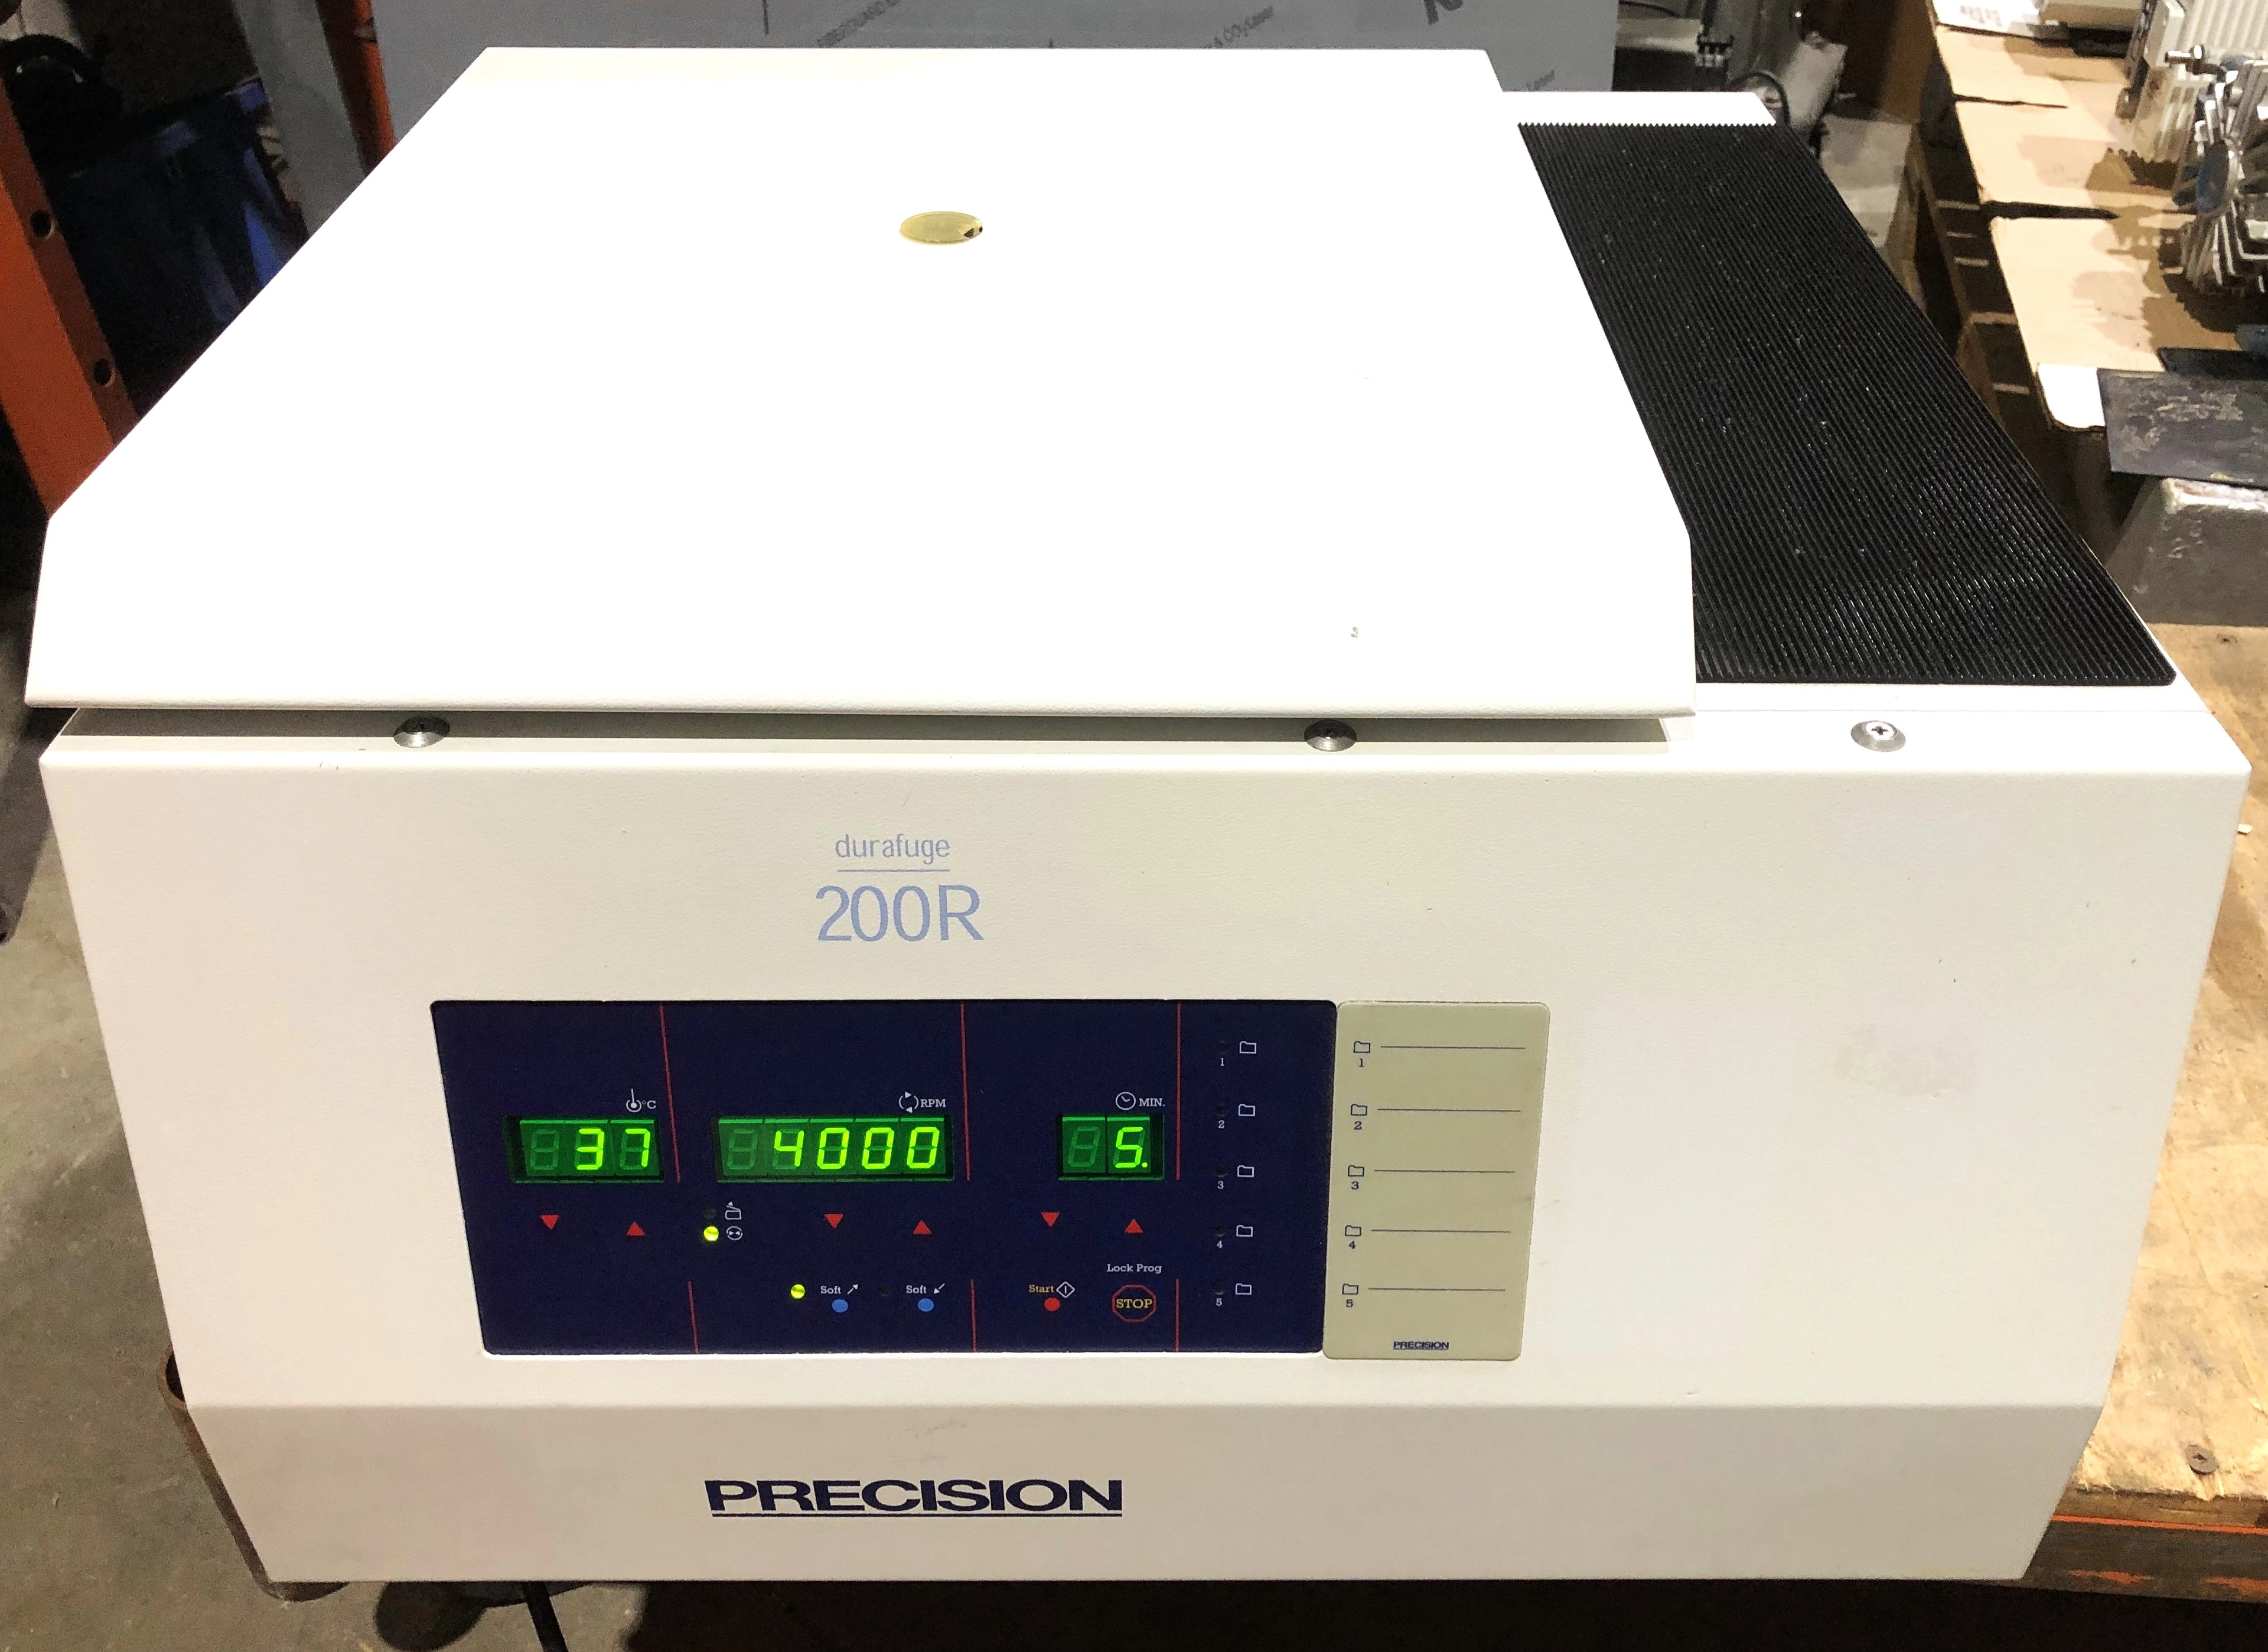 Precision Durafuge 200R Refrigerated Centrifuge with Rotor and Accessories - 4 x 190mL